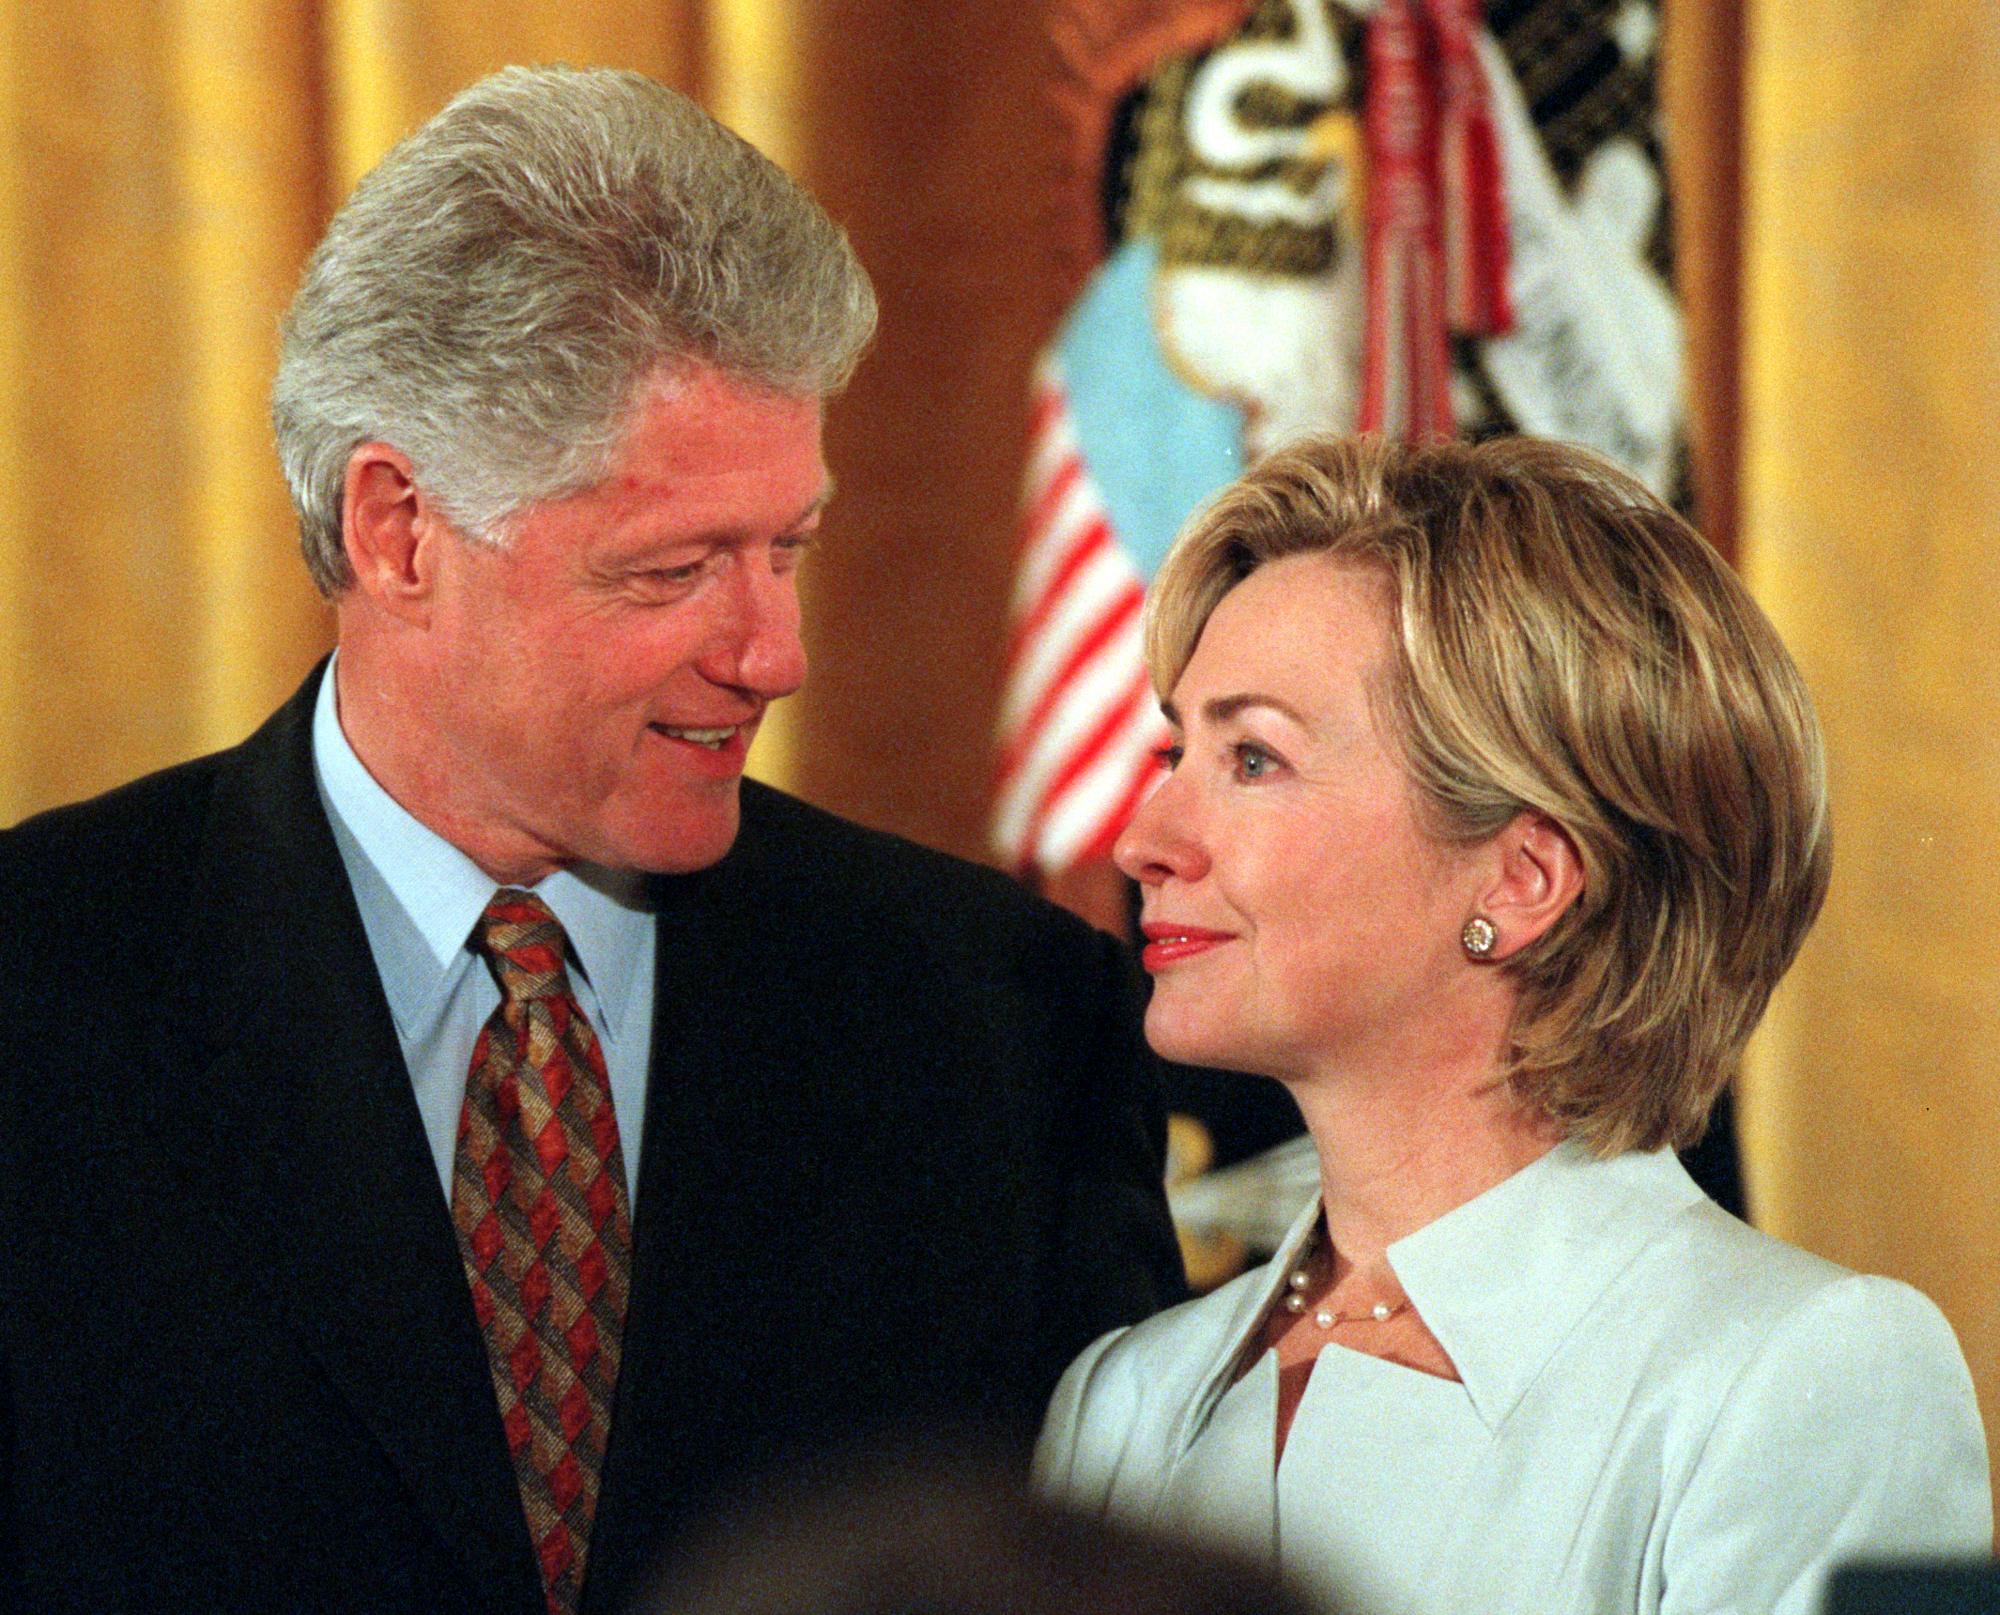 President Bill Clinton with First Lady Hillary Clinton during the Congressional Medal of Freedom ceremony in the east room of the White house. Picture taken Wednesday, August 11, 1999. (AP Photo/Virginian-Pilot, LAWRENCE JACKSON)